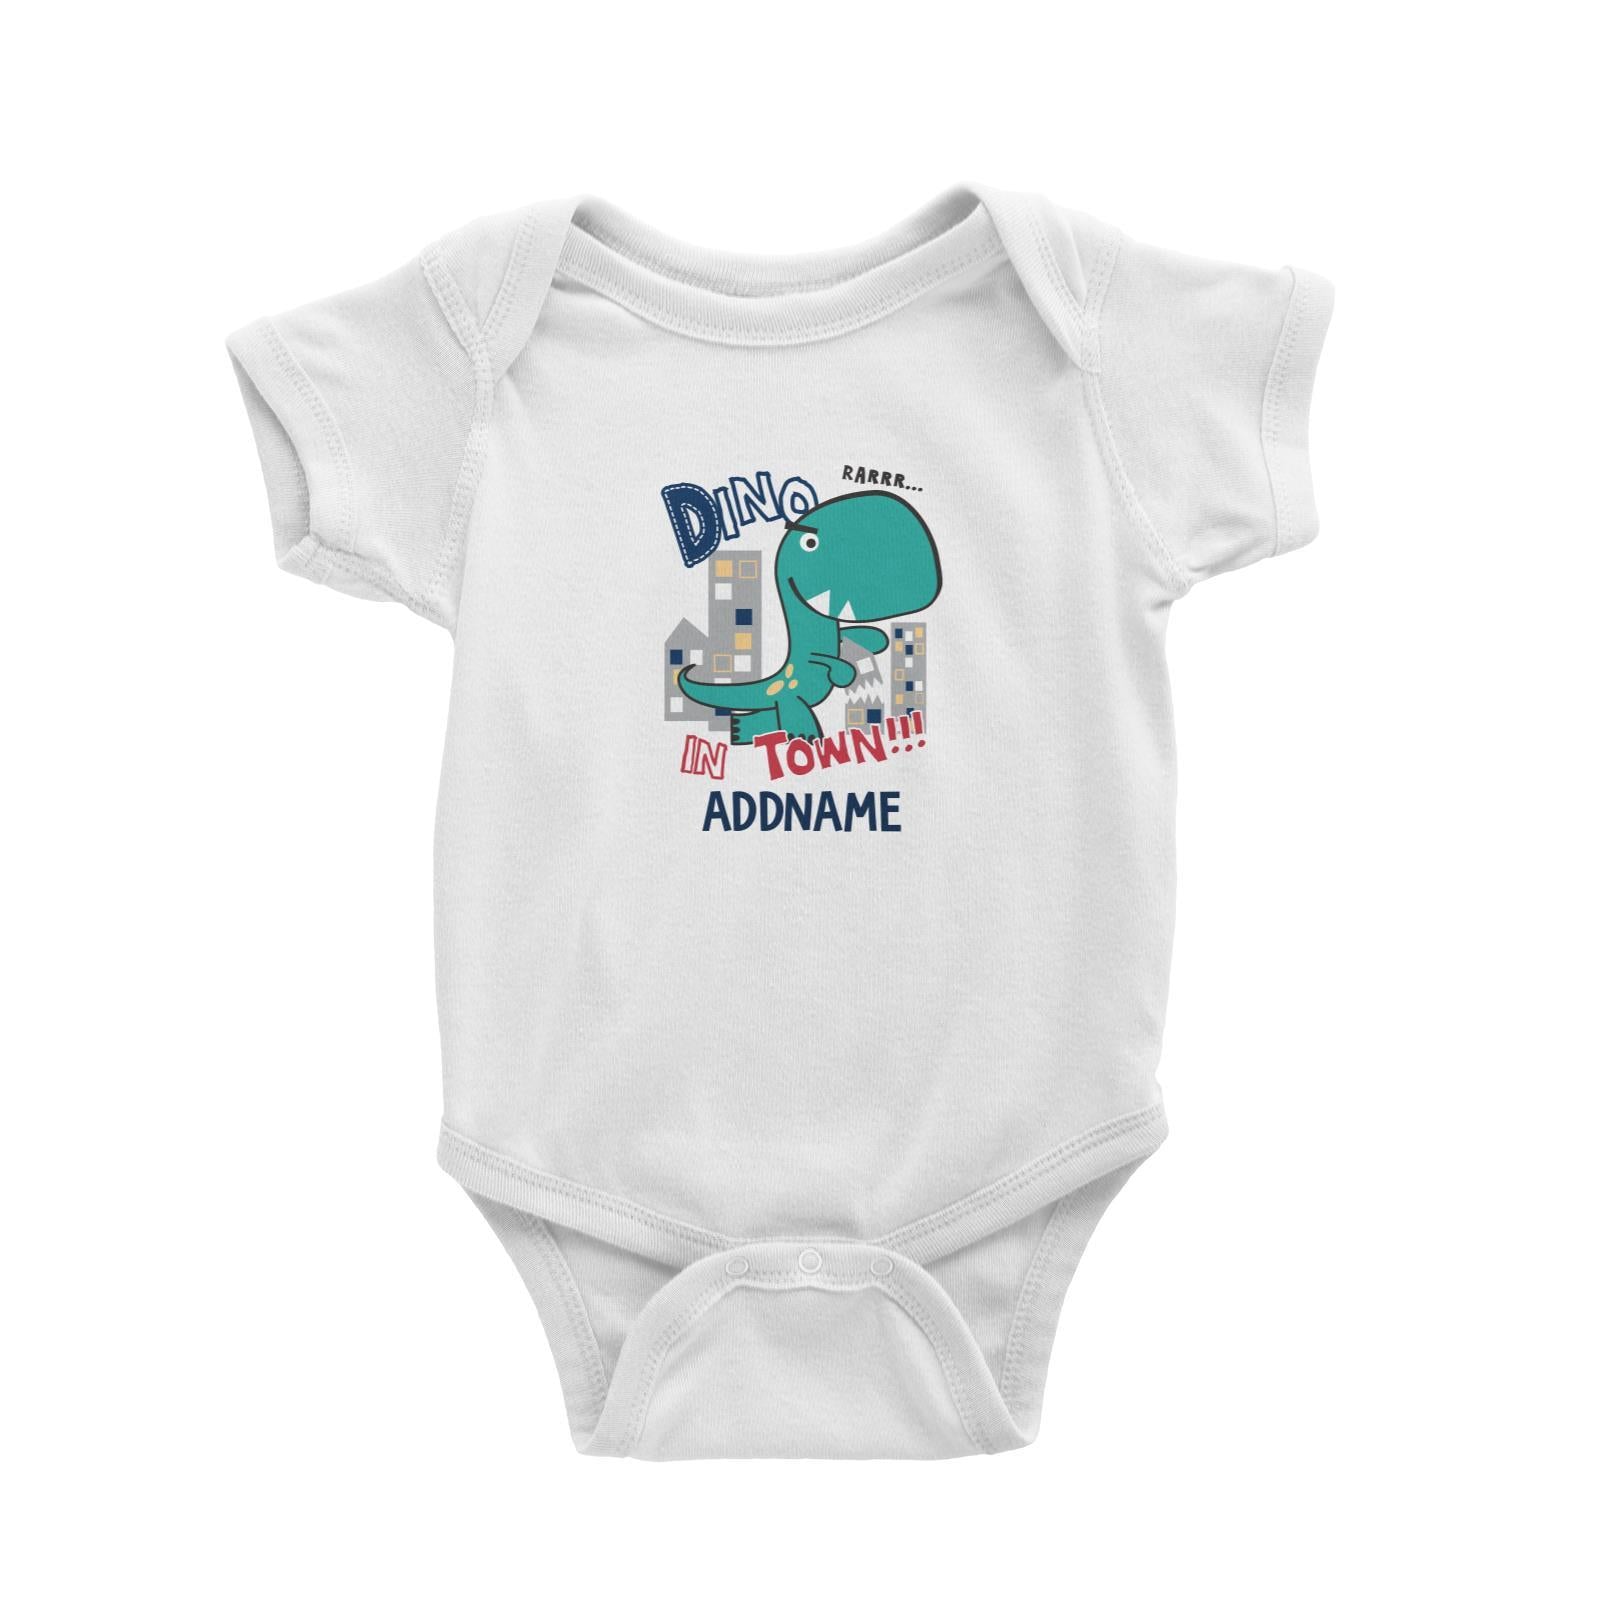 Cool Vibrant Series Dino In Town Addname Baby Romper